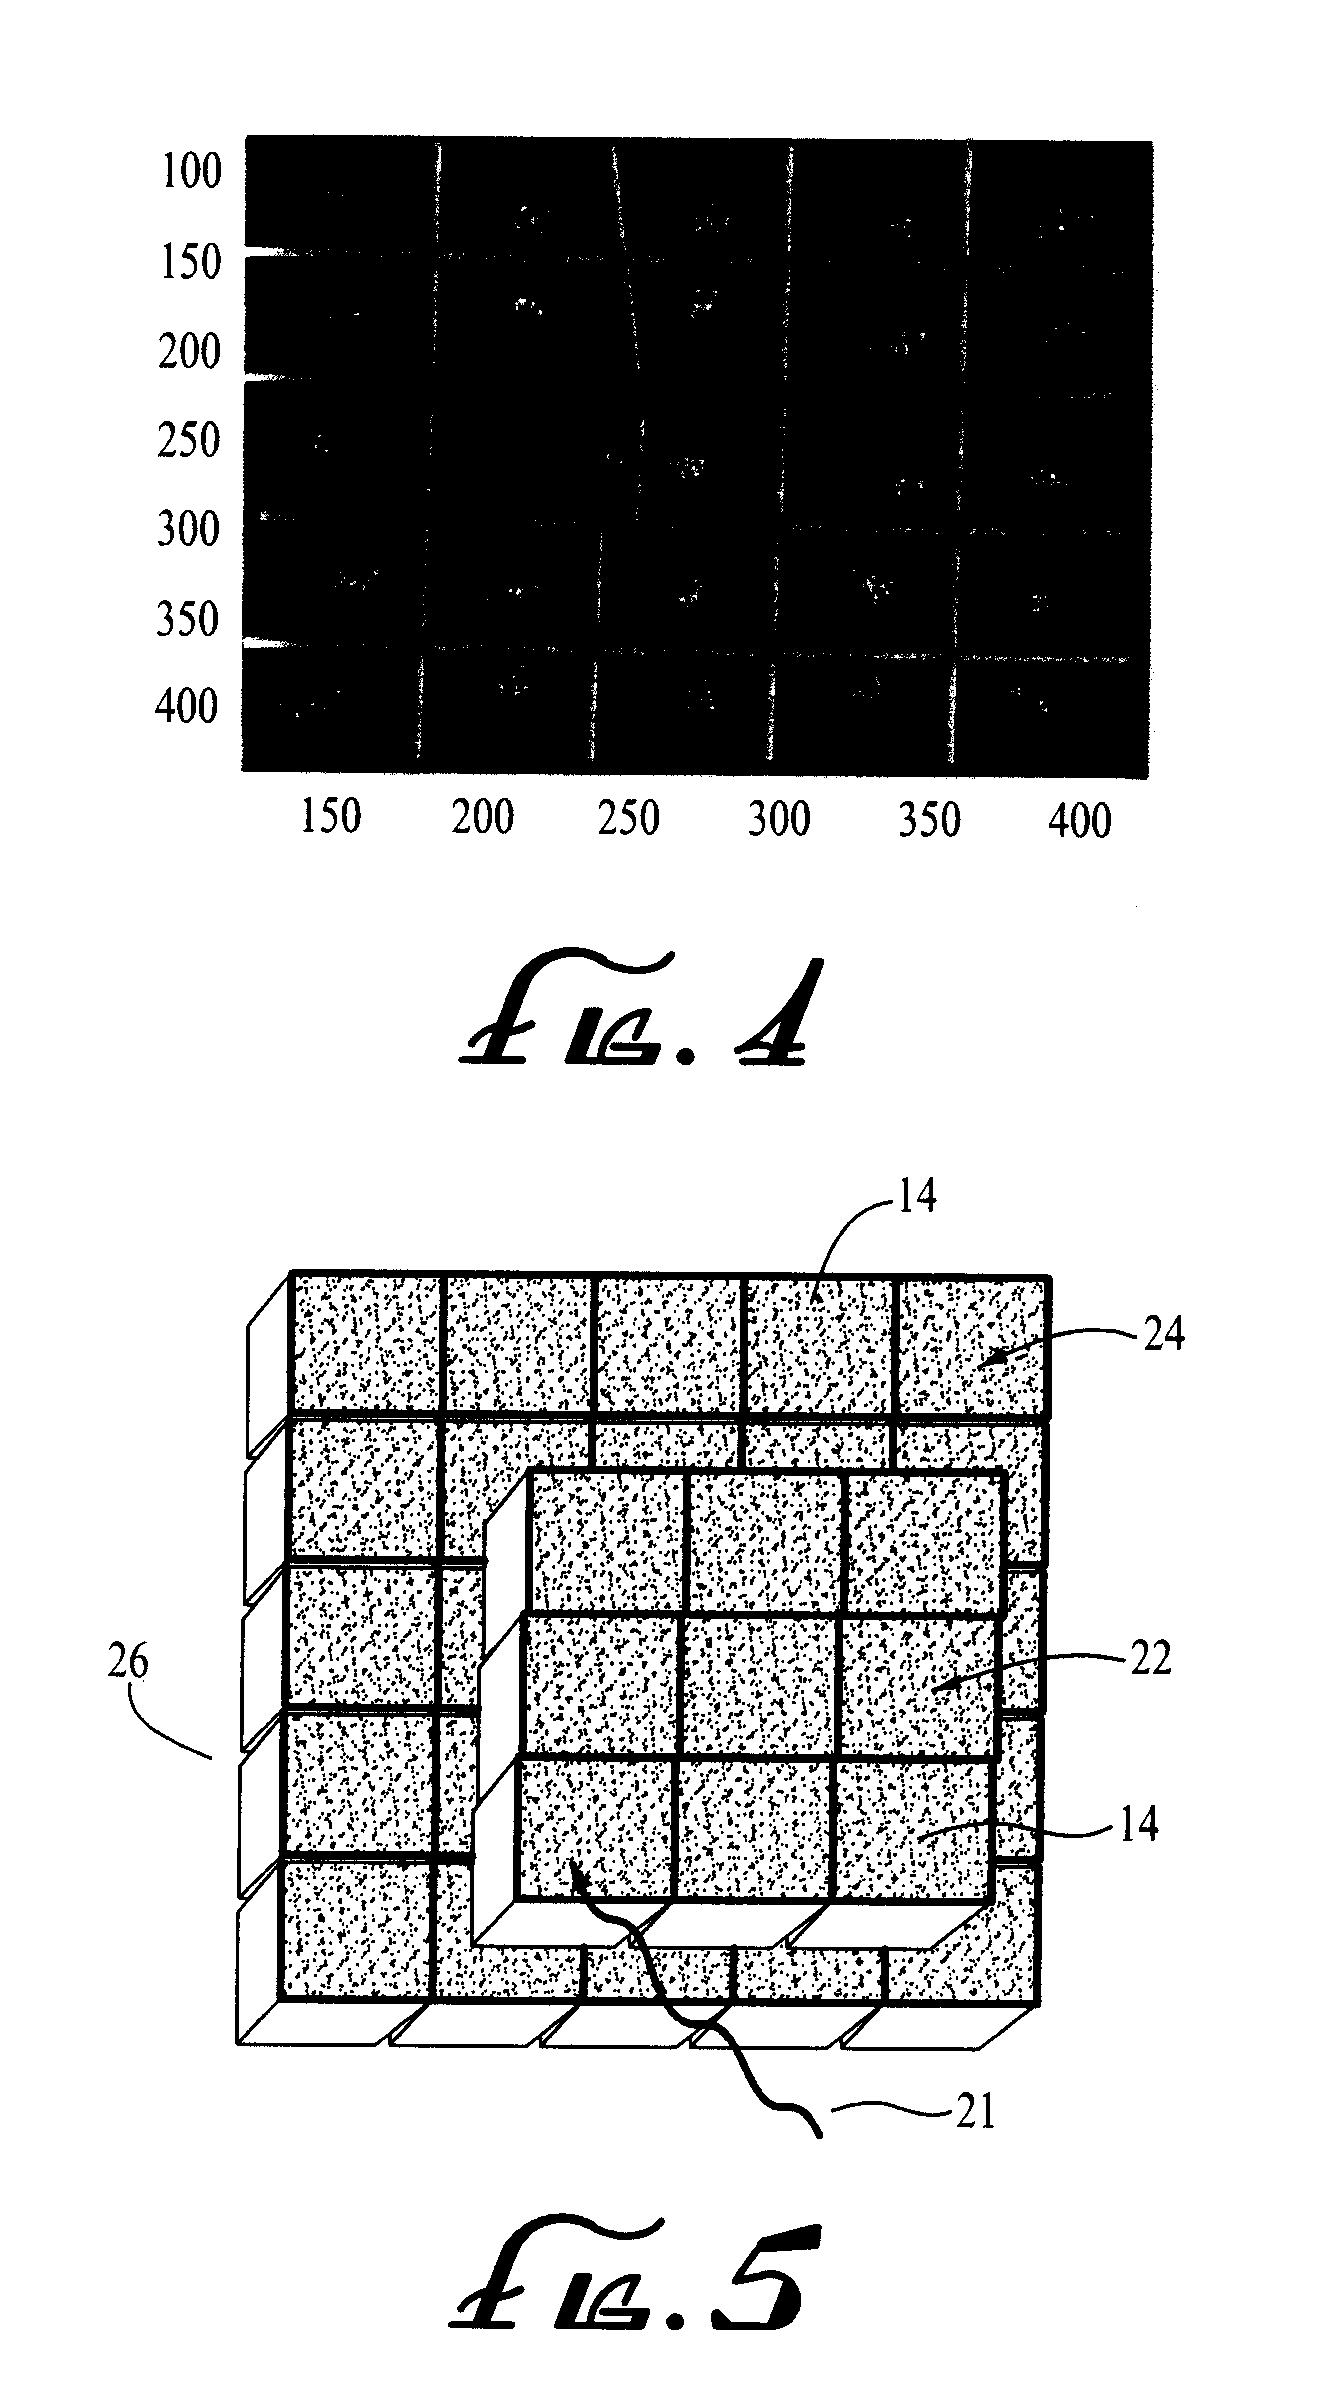 Portable pet scanner for imaging of a portion of the body